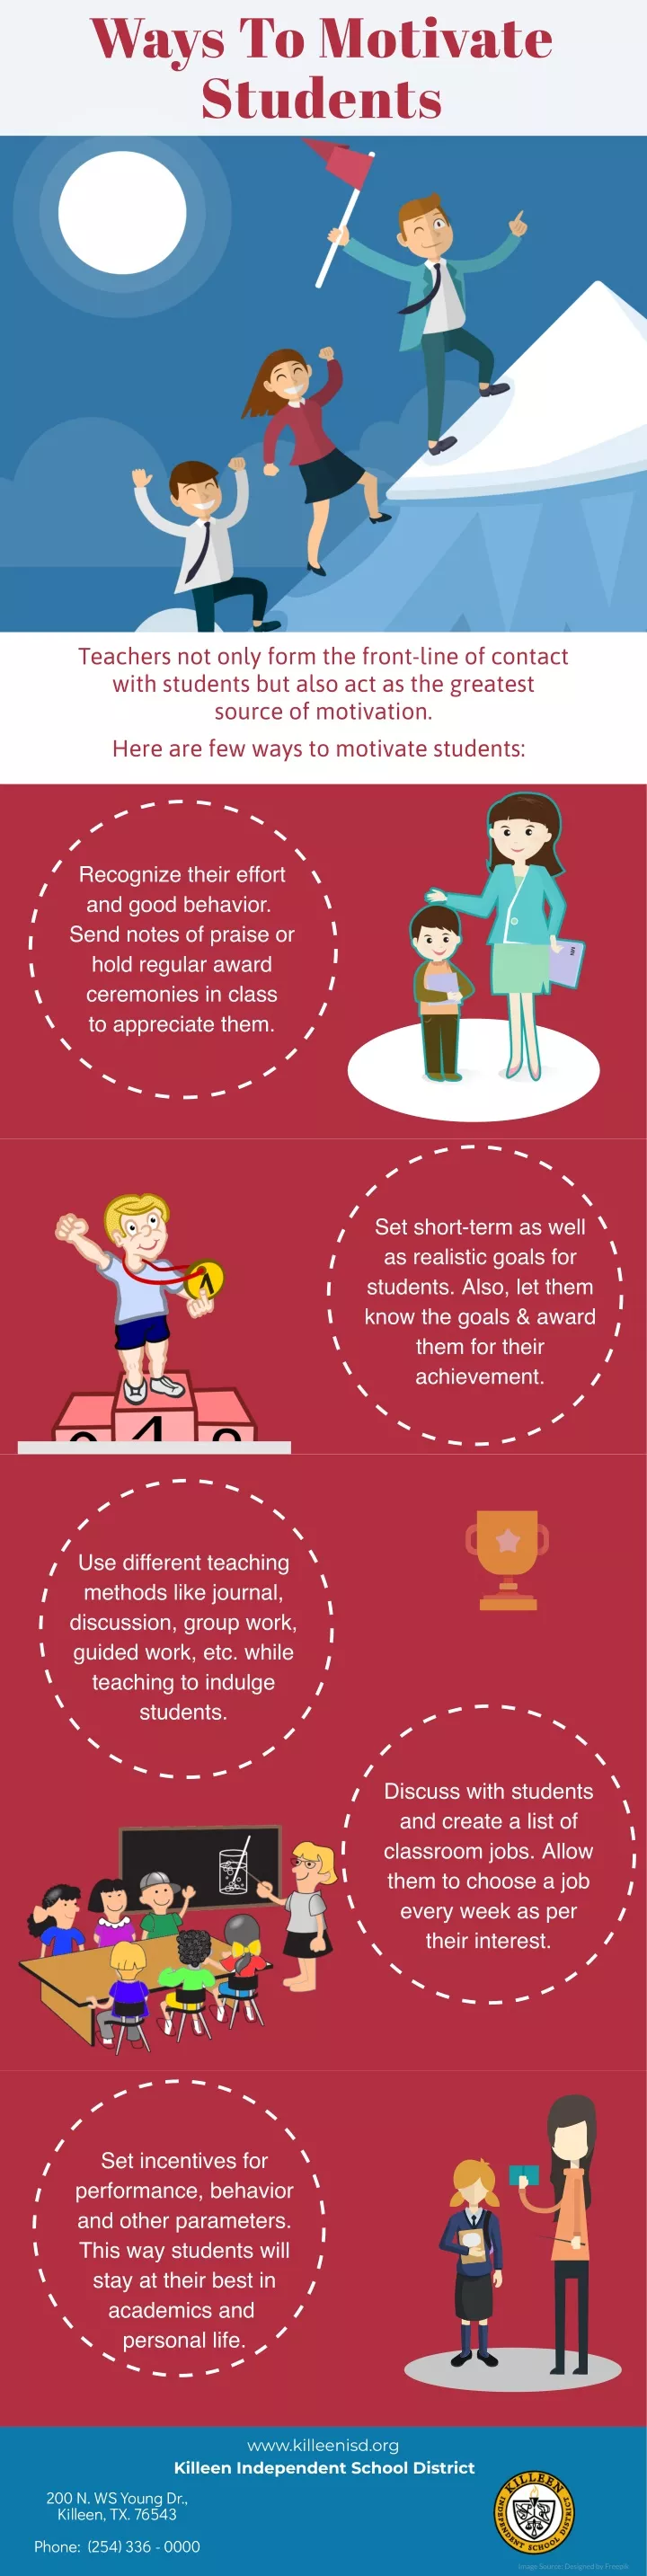 ways to motivate students